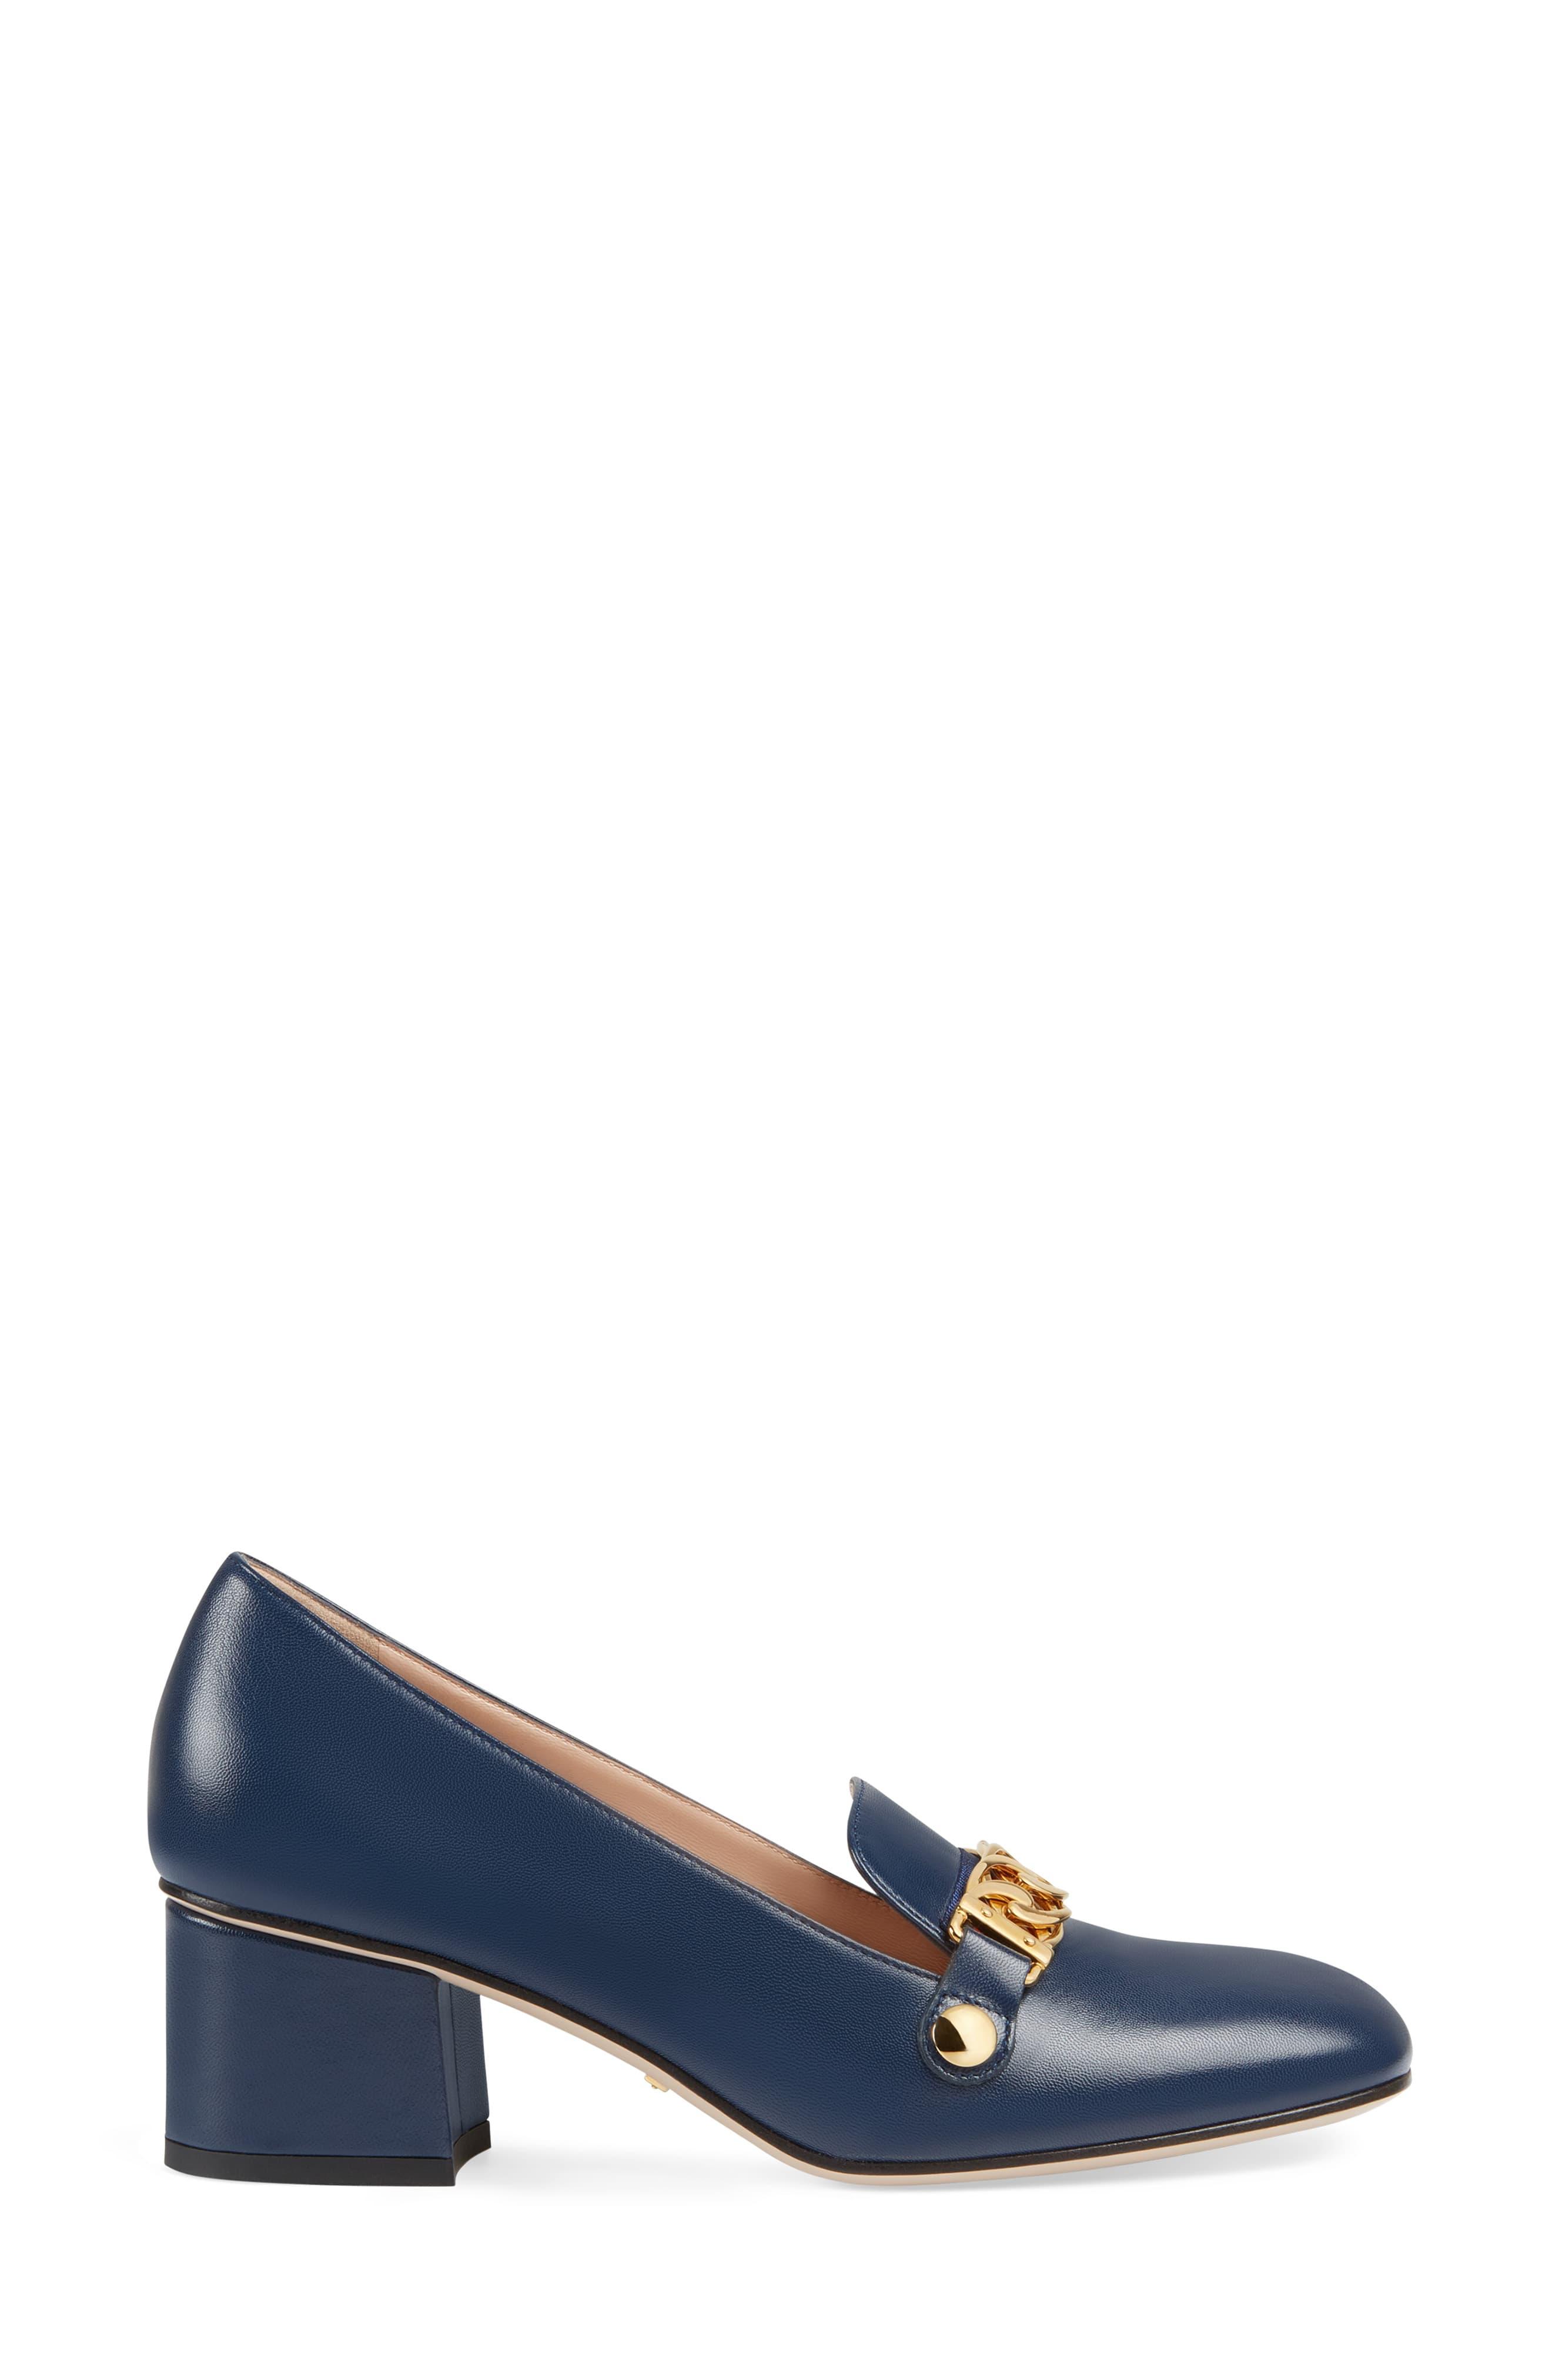 Gucci Sylvie Loafer Pump in Blue - Lyst